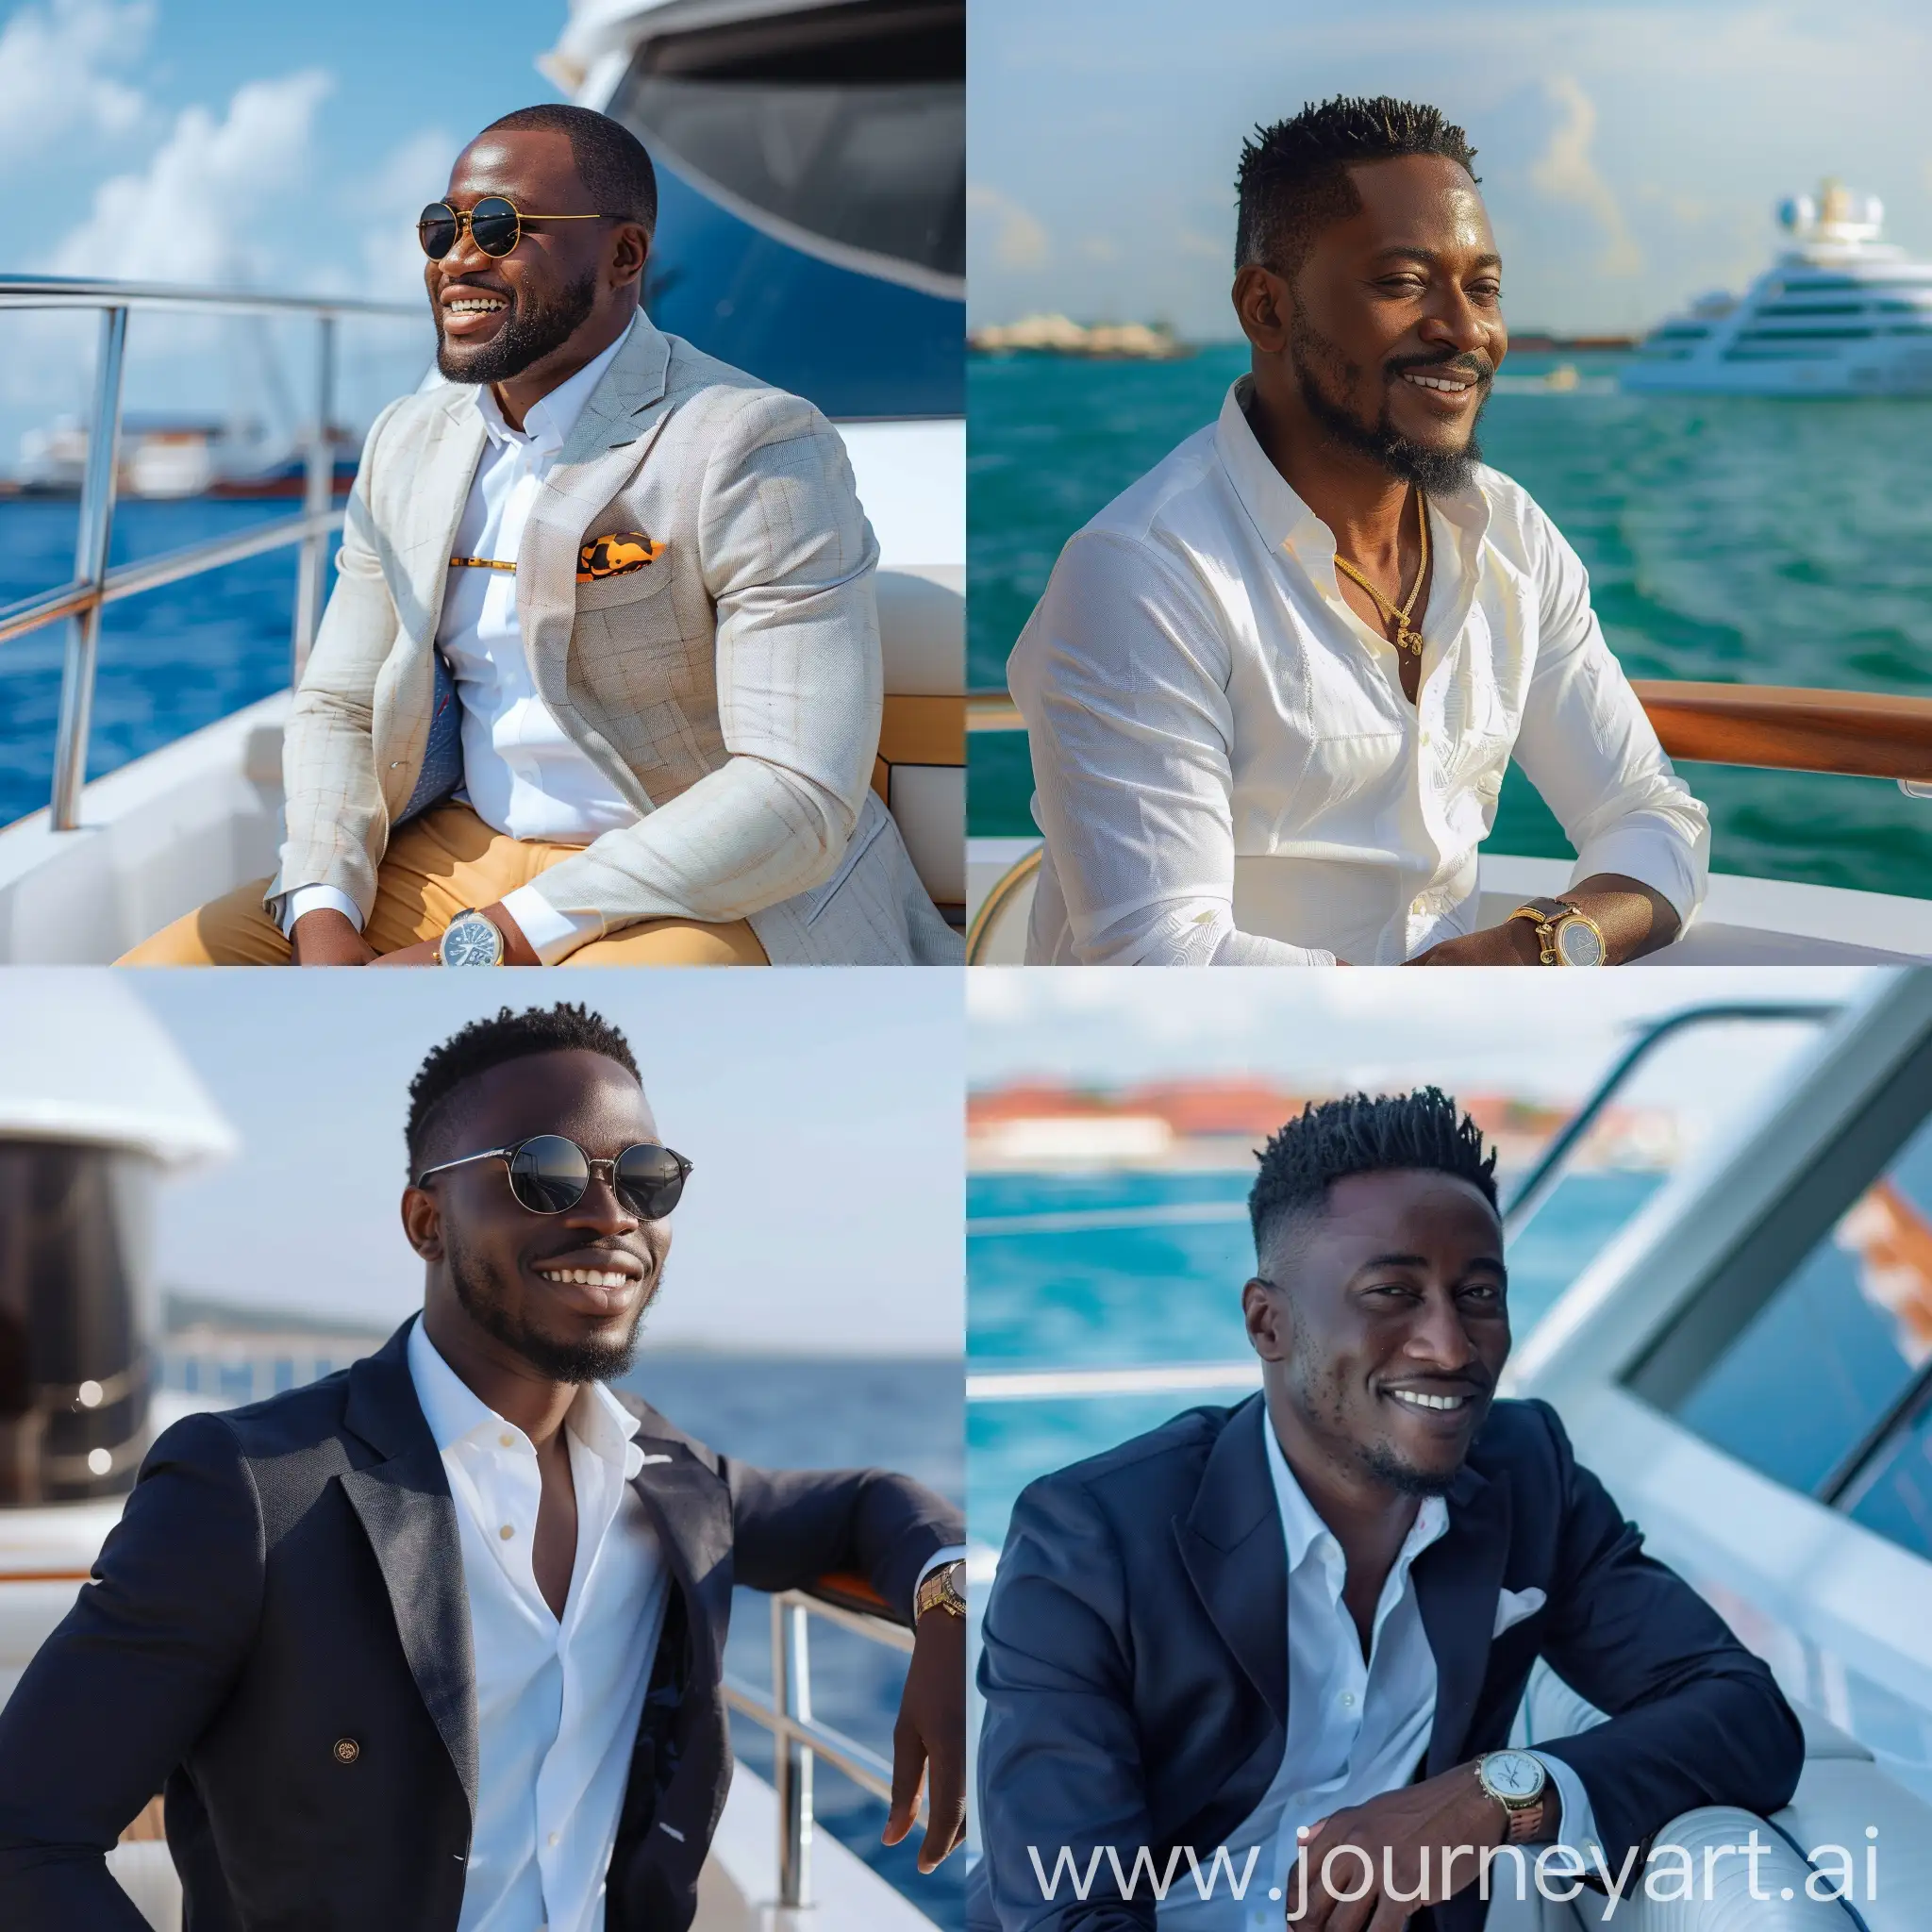 successful looking business man from Nigerian origin, looking happy on a yacht